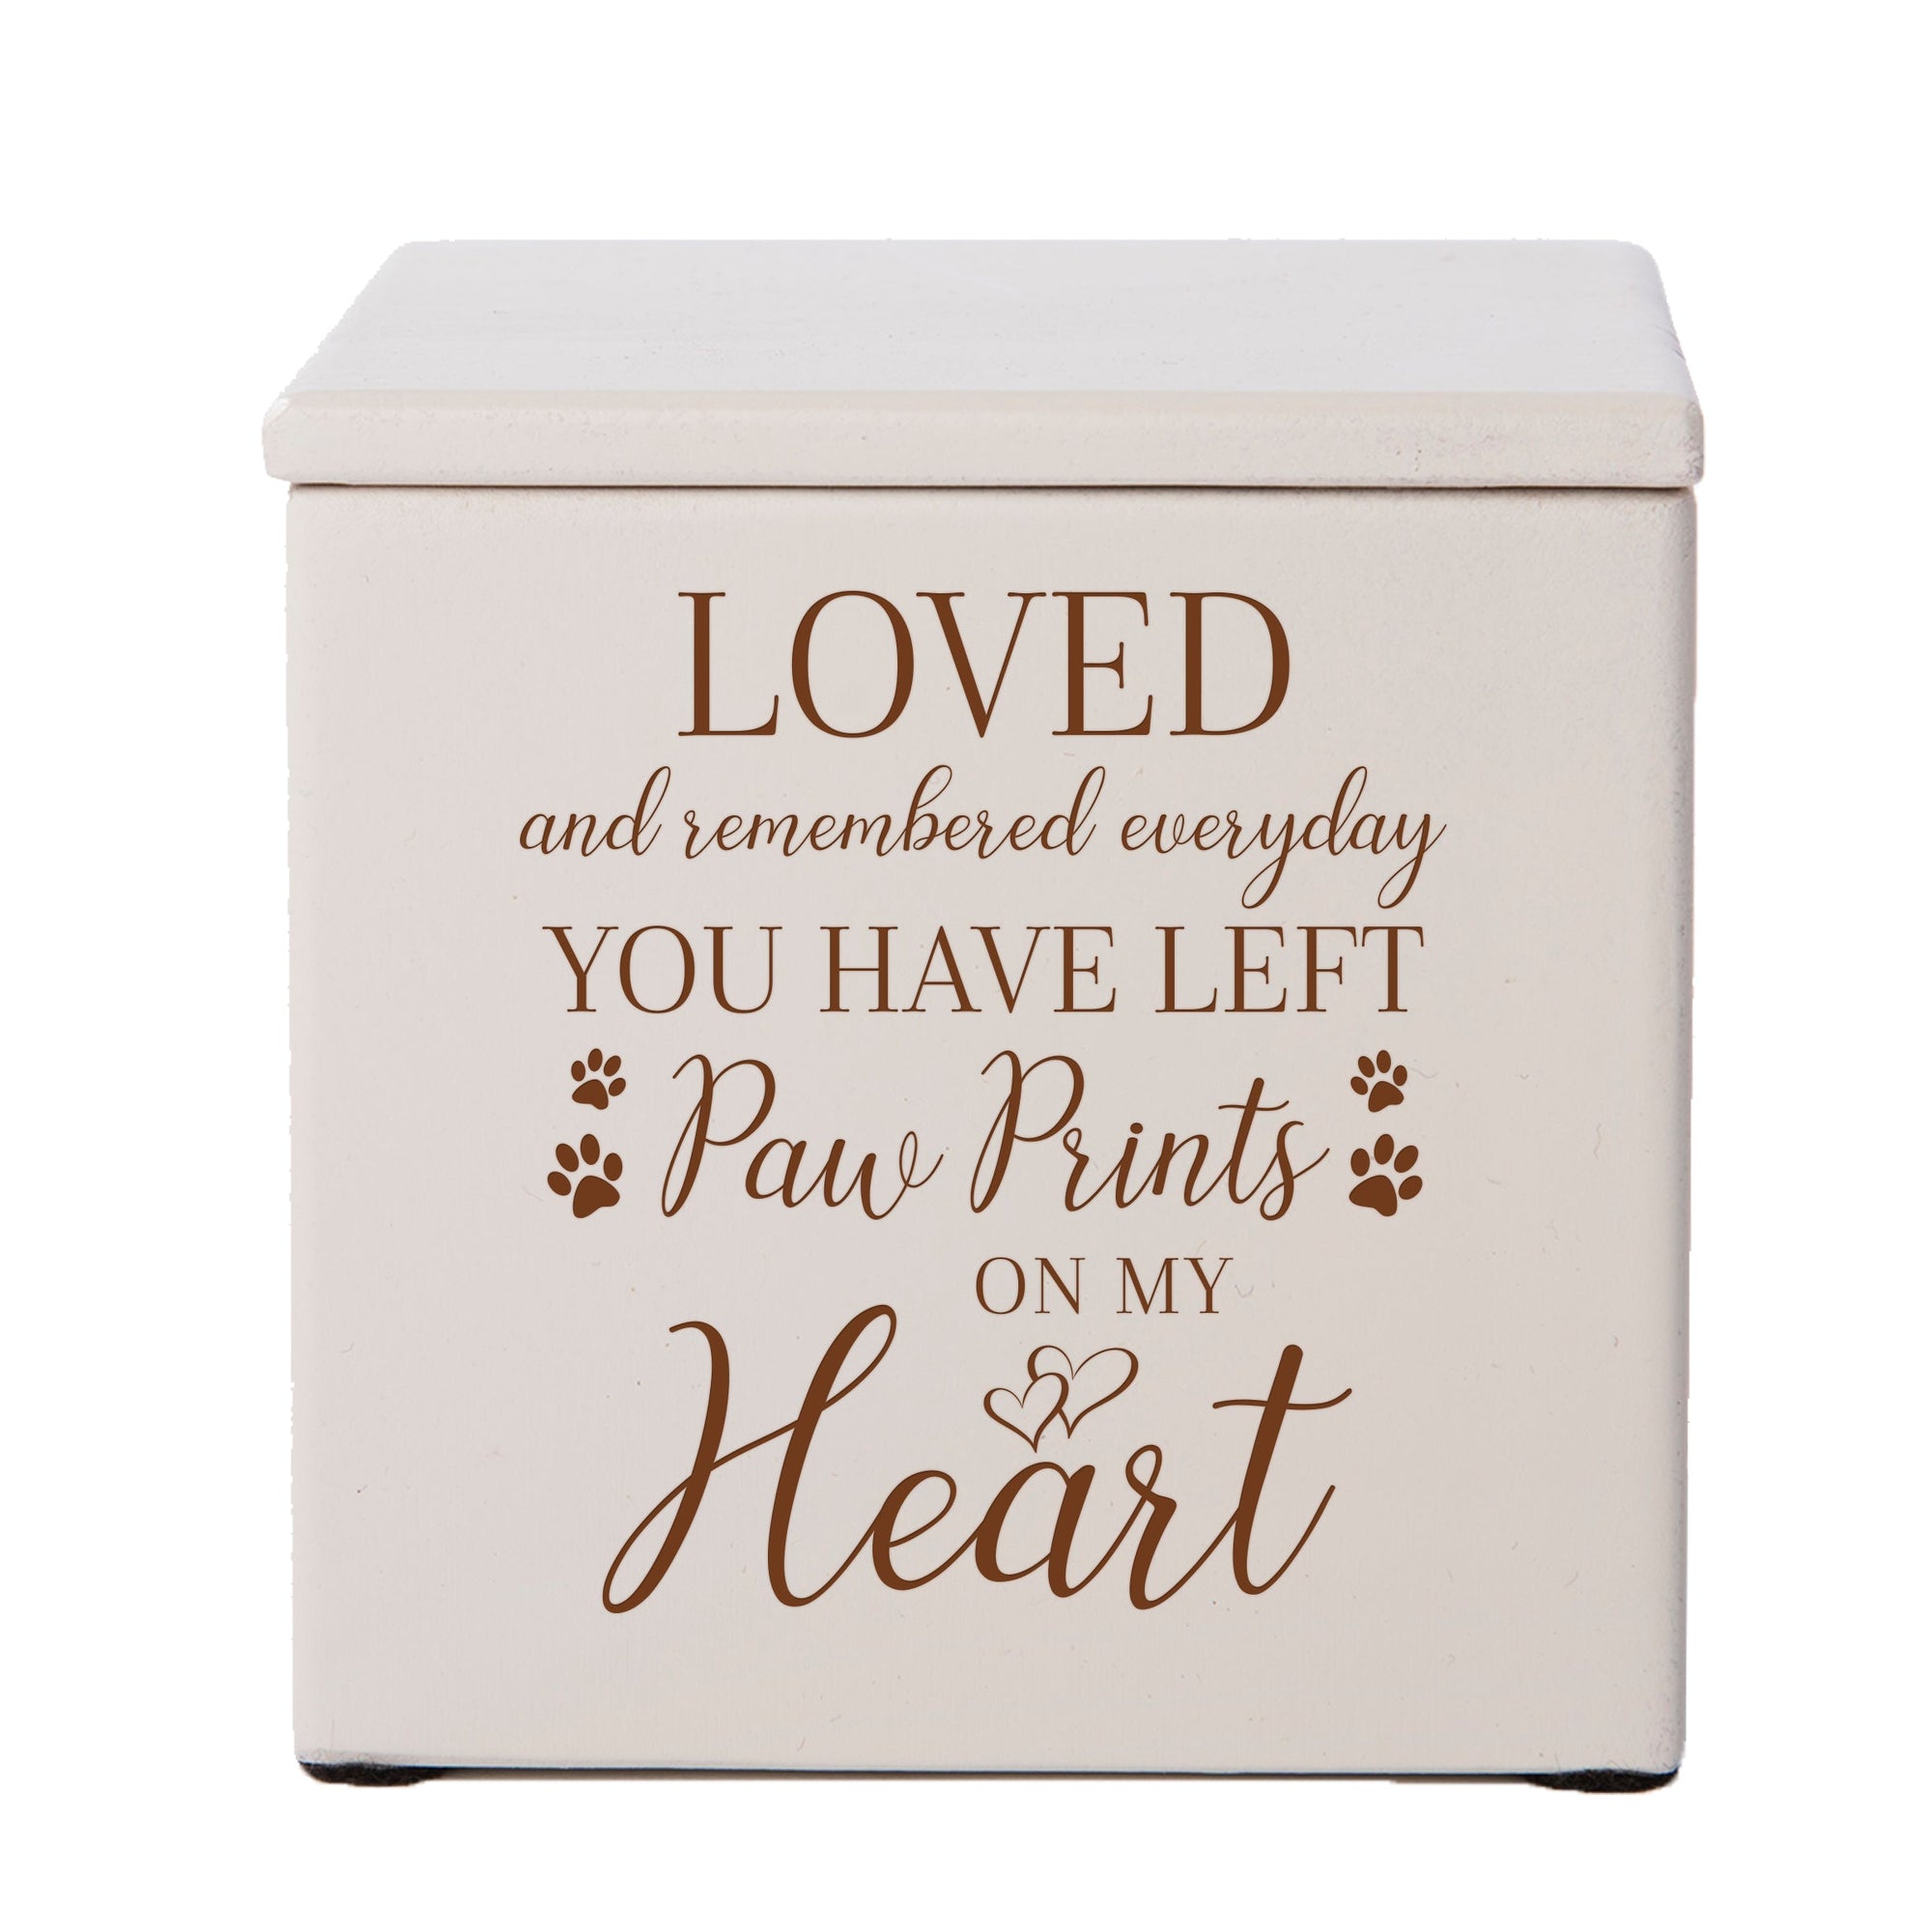 Pet Memorial Keepsake Cremation Urn Box for Dog or Cat - Loved and Remembered Everyday